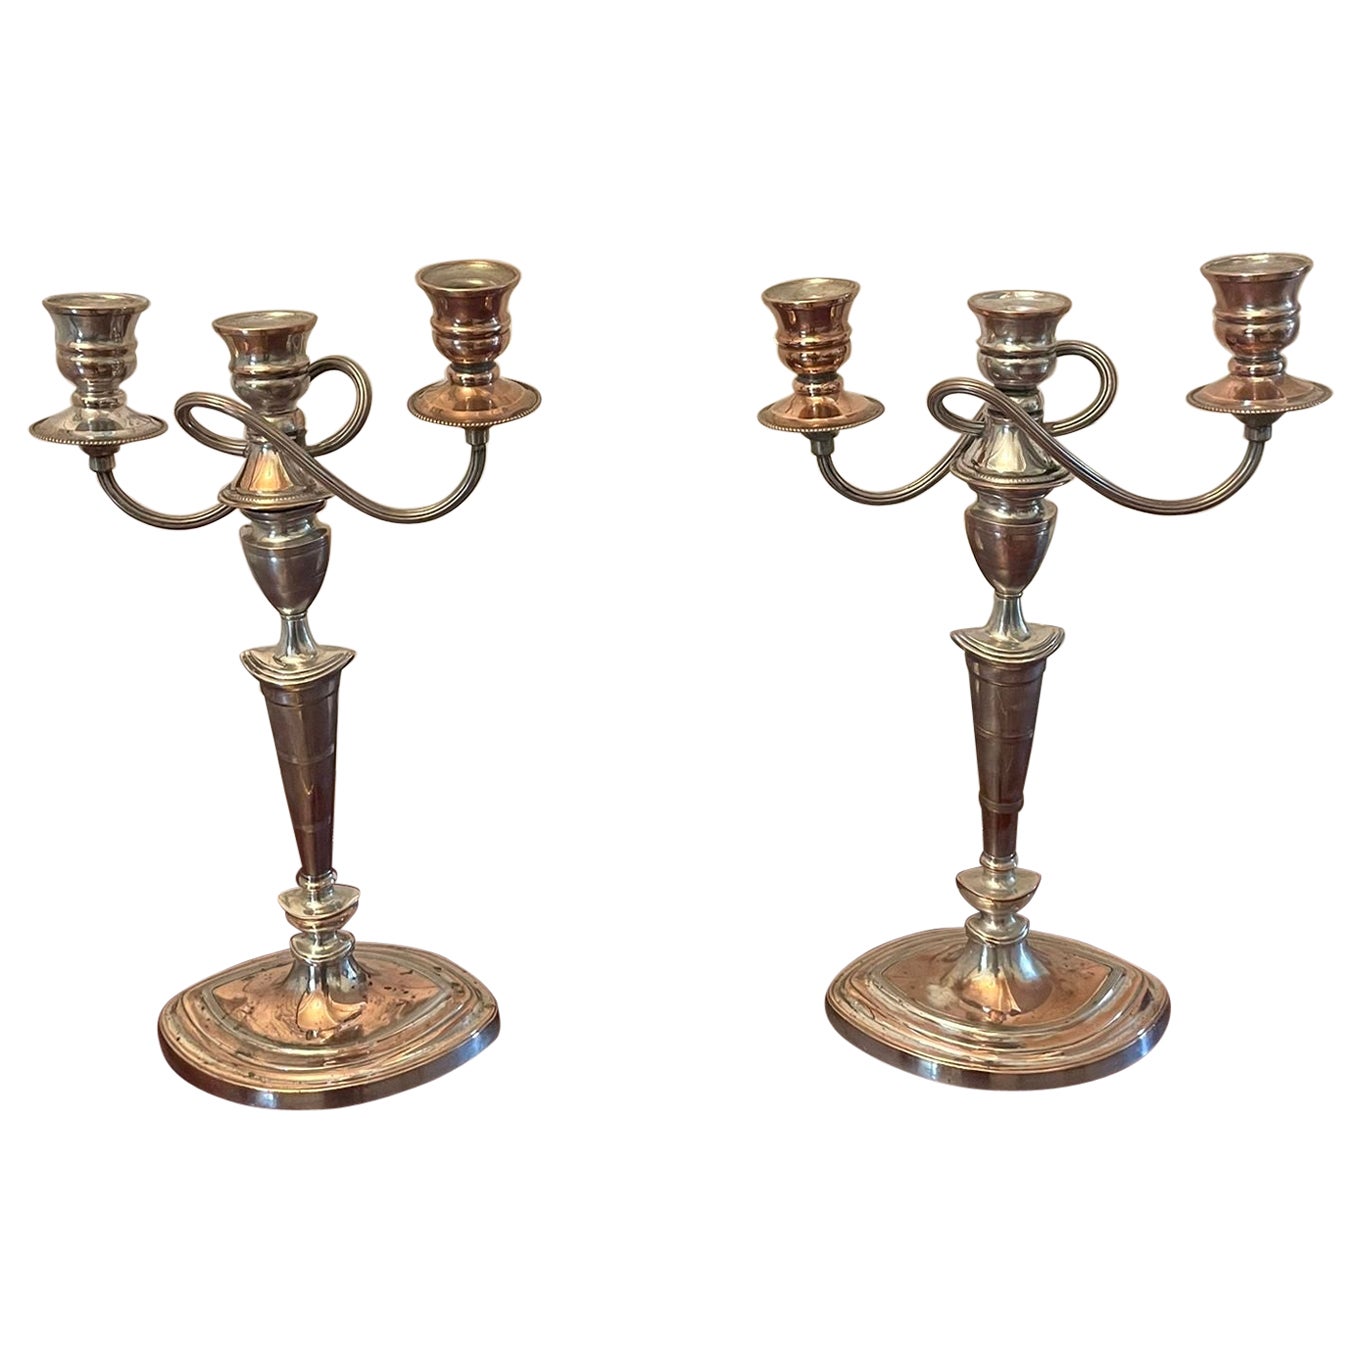  Pair of Antique Victorian Quality Sheffield Plated Candelabras  For Sale